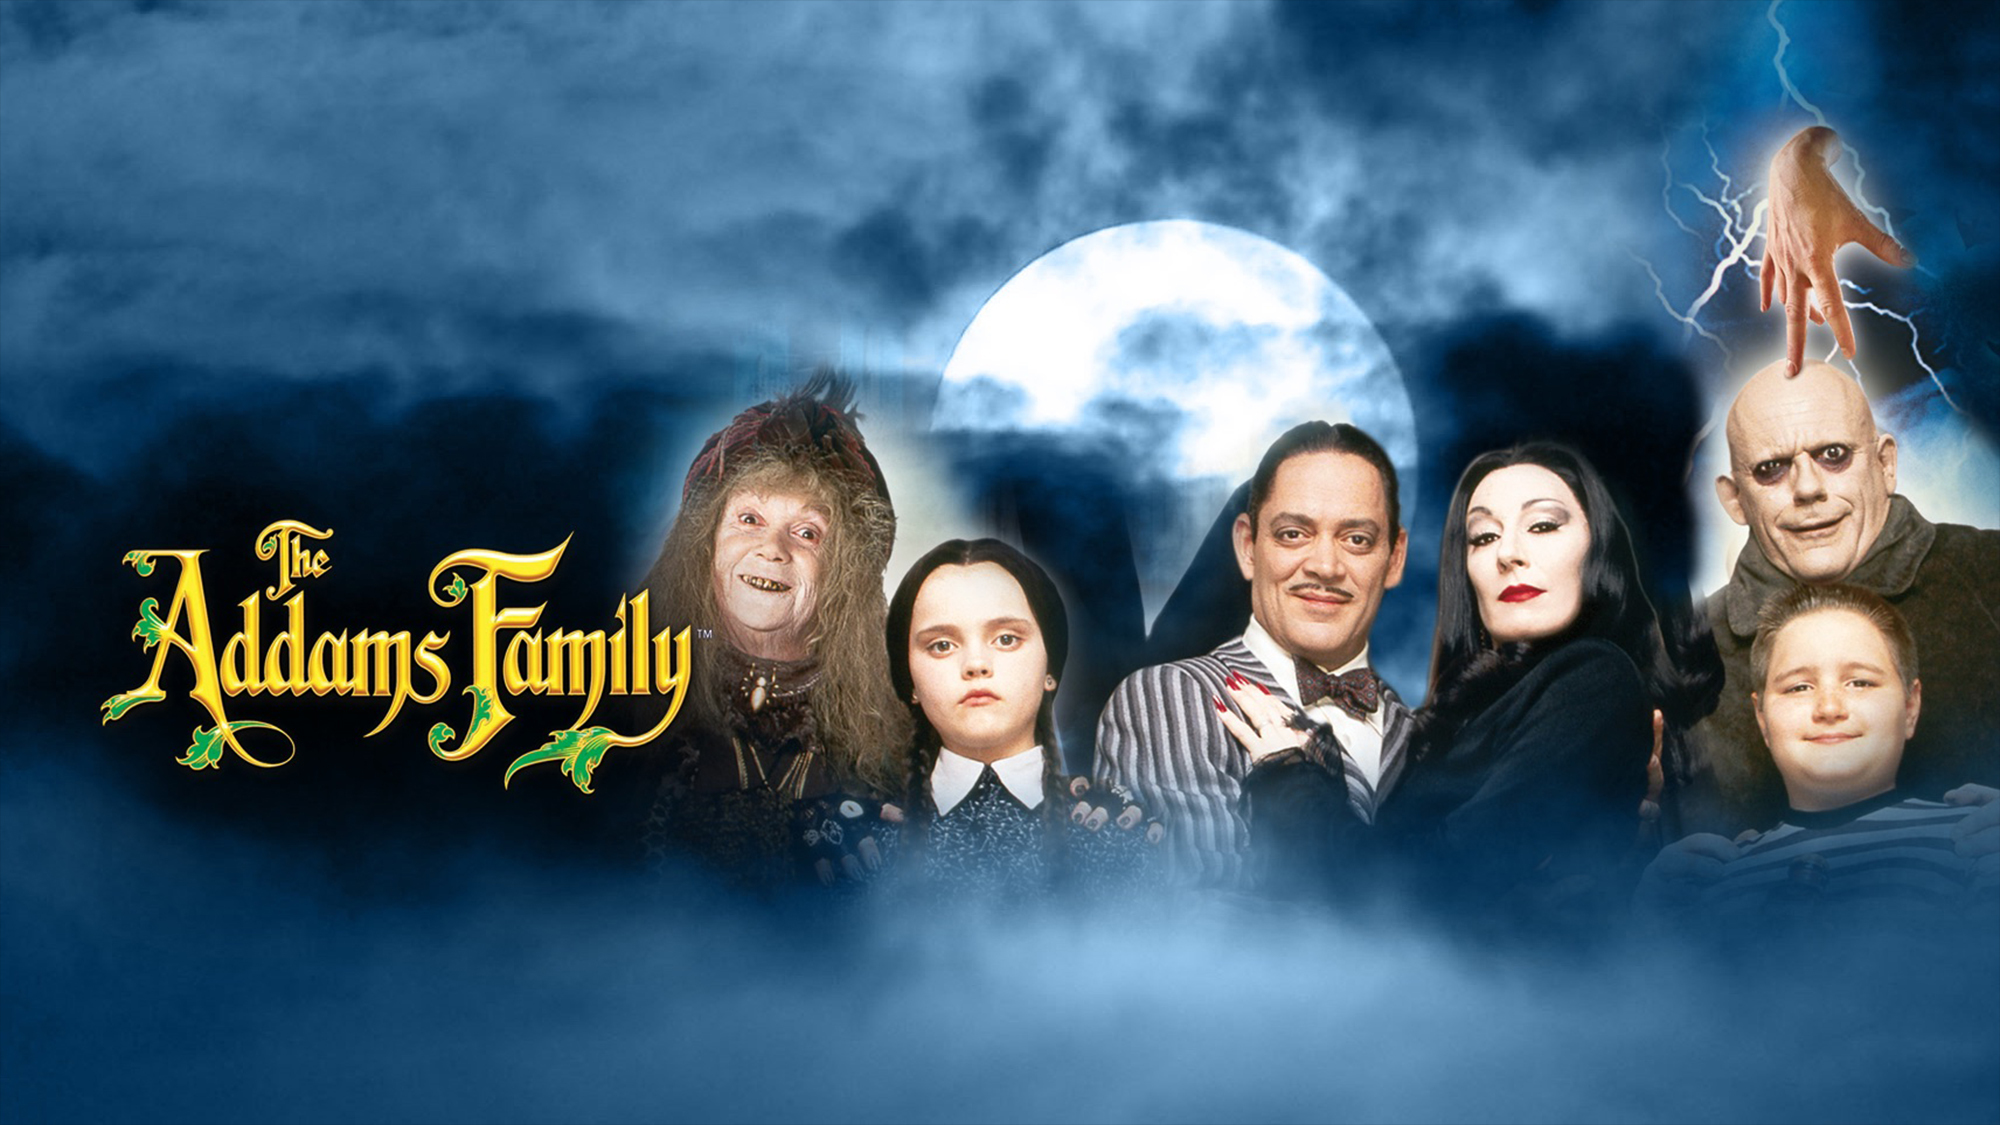 The Addams Family / The Addams Family (2019)